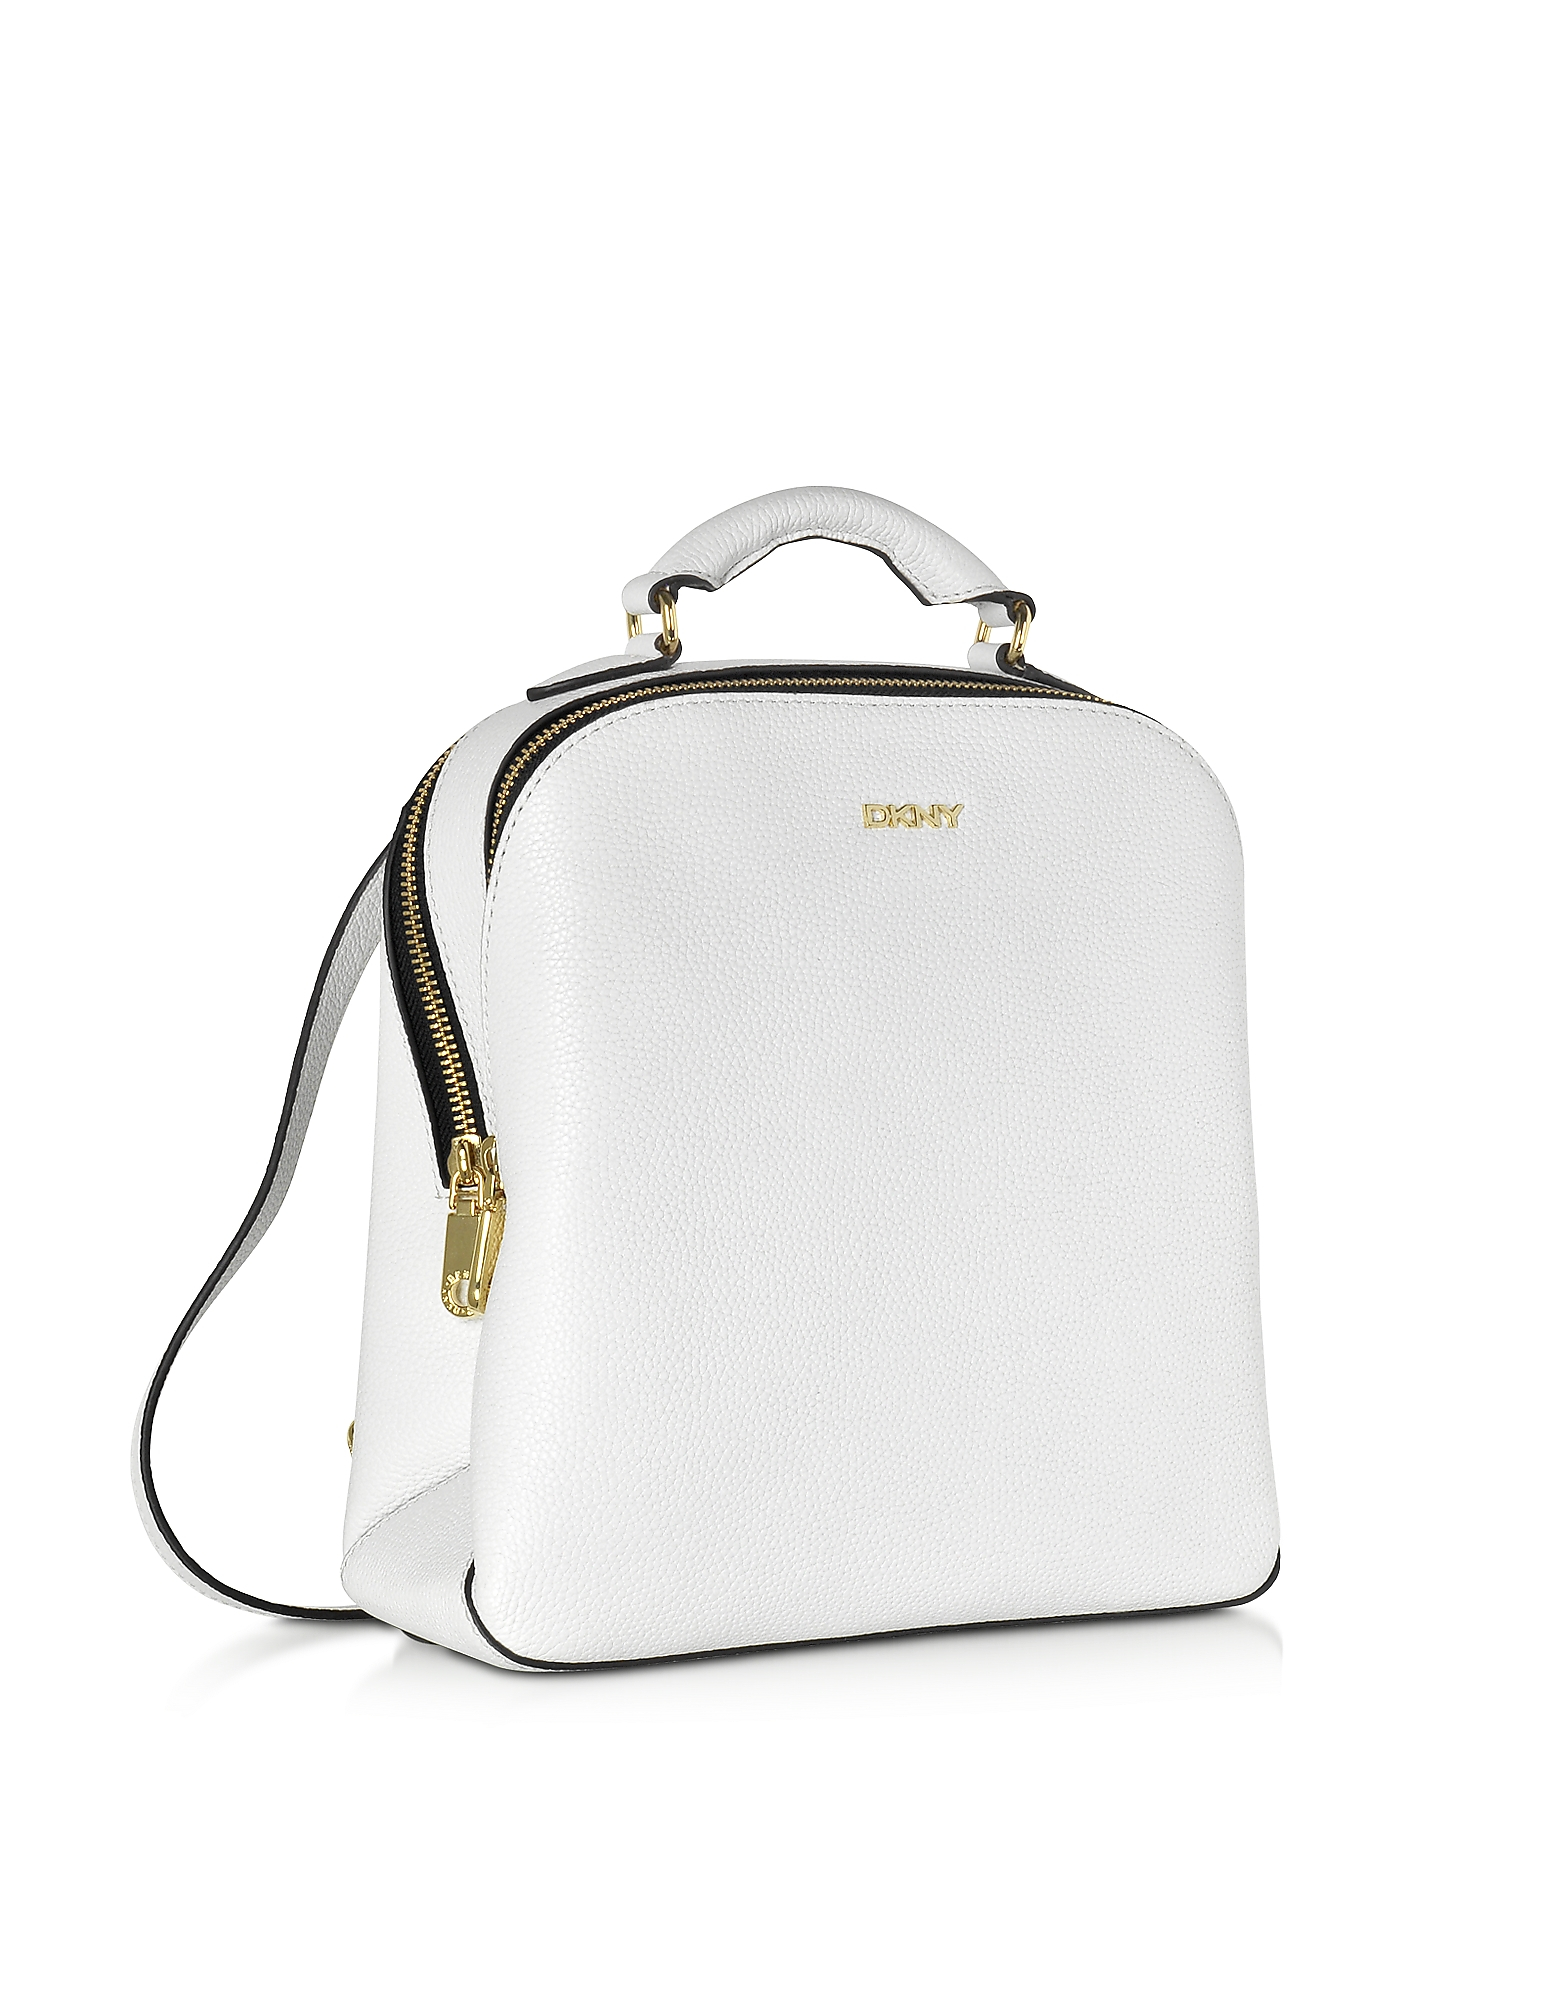 Dkny White Fine Pebble Leather Mini Backpack in White | Lyst